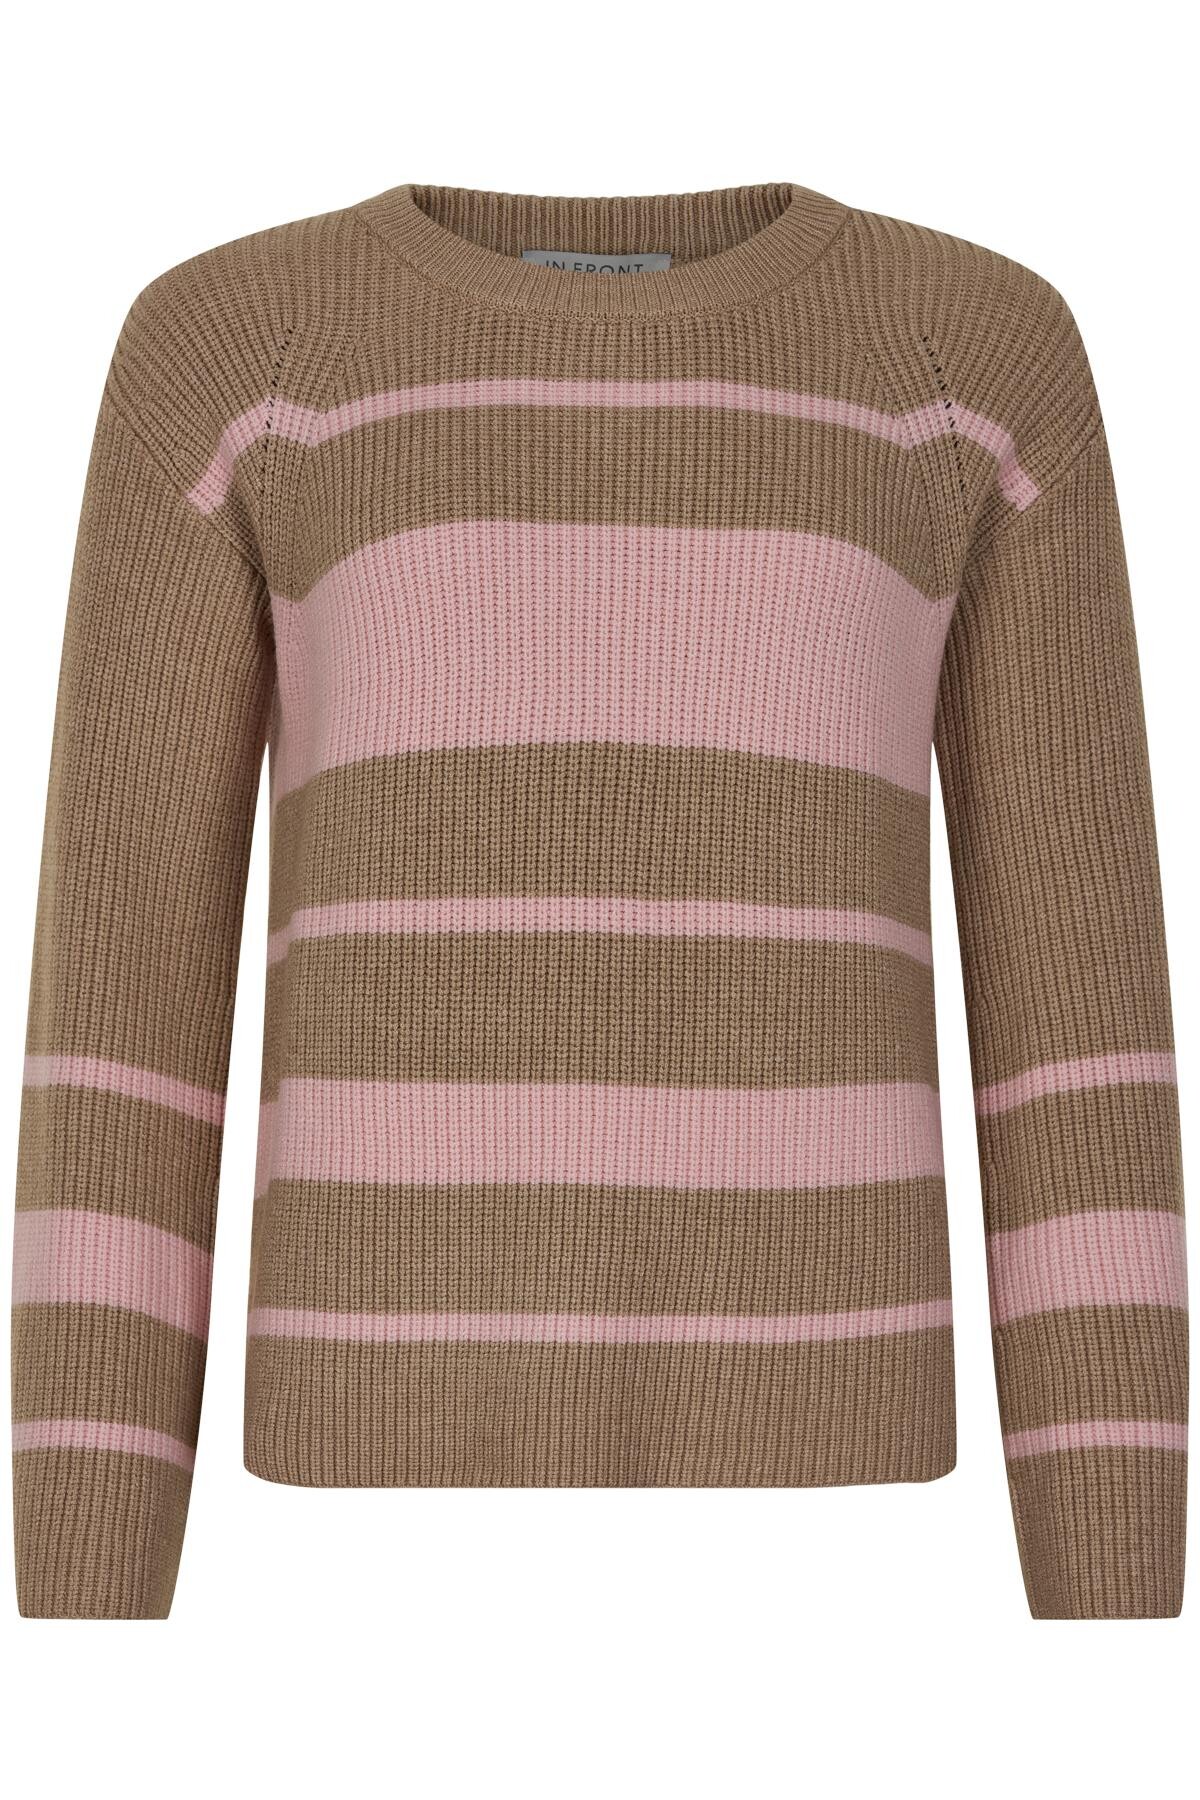 4: IN FRONT MIRA KNIT JUMPER 14820 205 (Soft Rose 205, M)